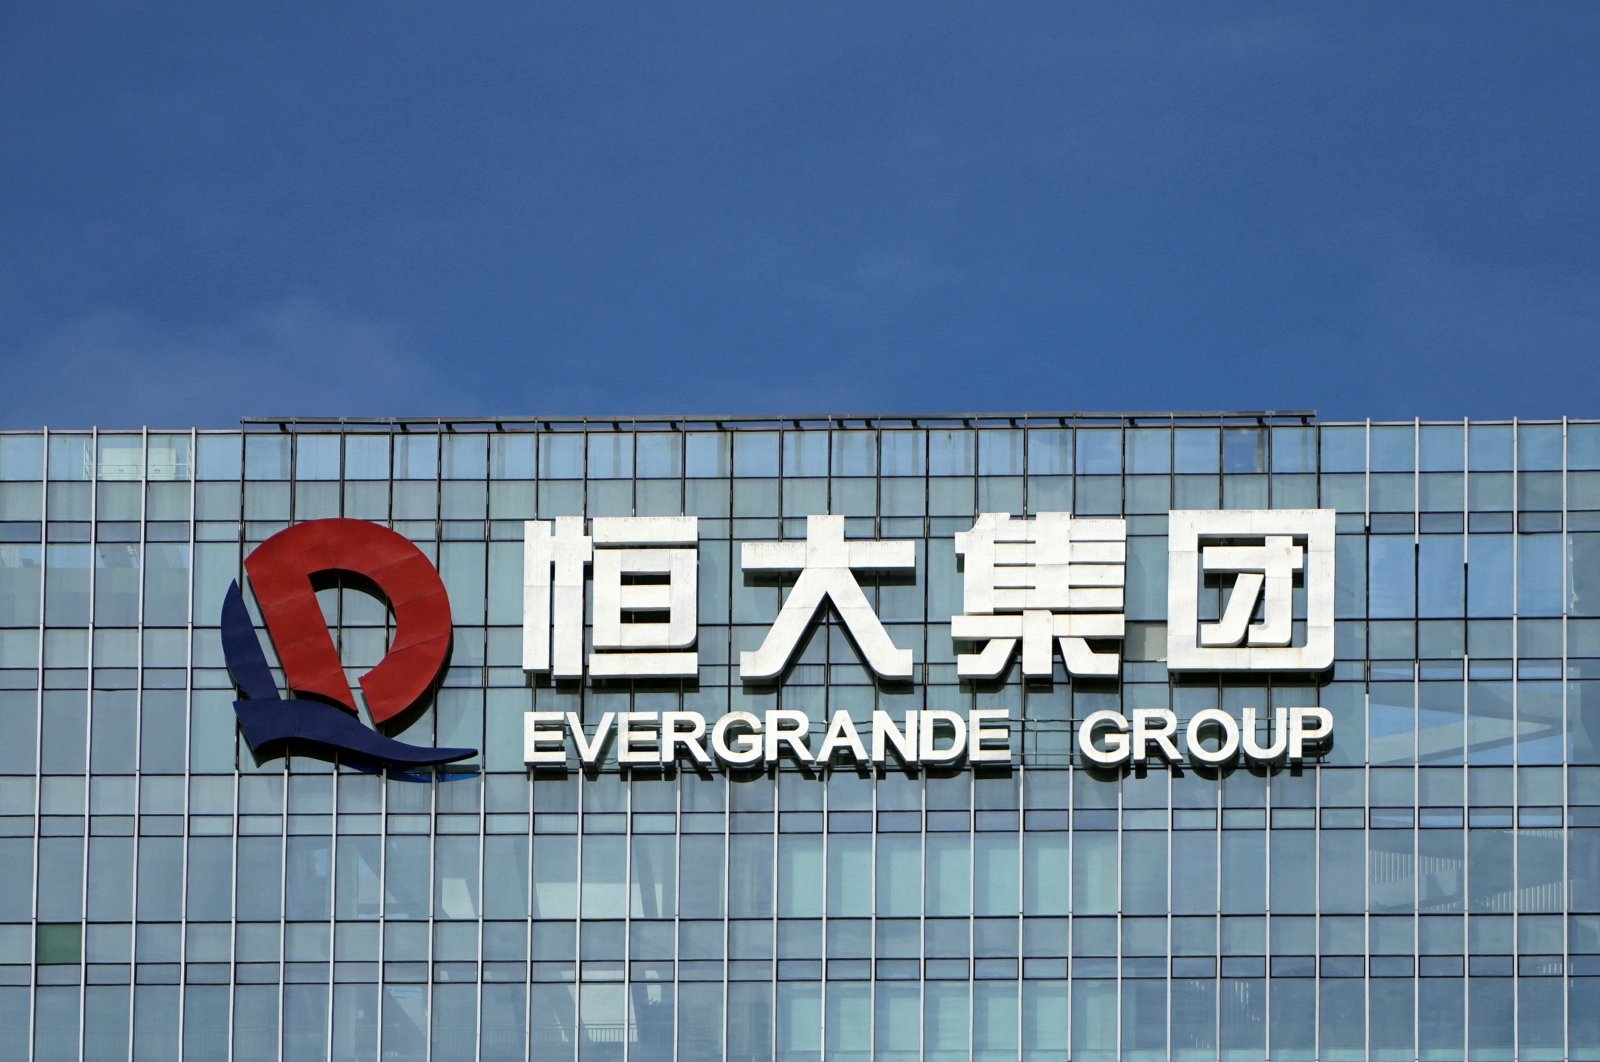 The company logo is seen on the headquarters of China Evergrande Group in Shenzhen, Guangdong province, China, Sept. 26, 2021. (Reuters Photo)